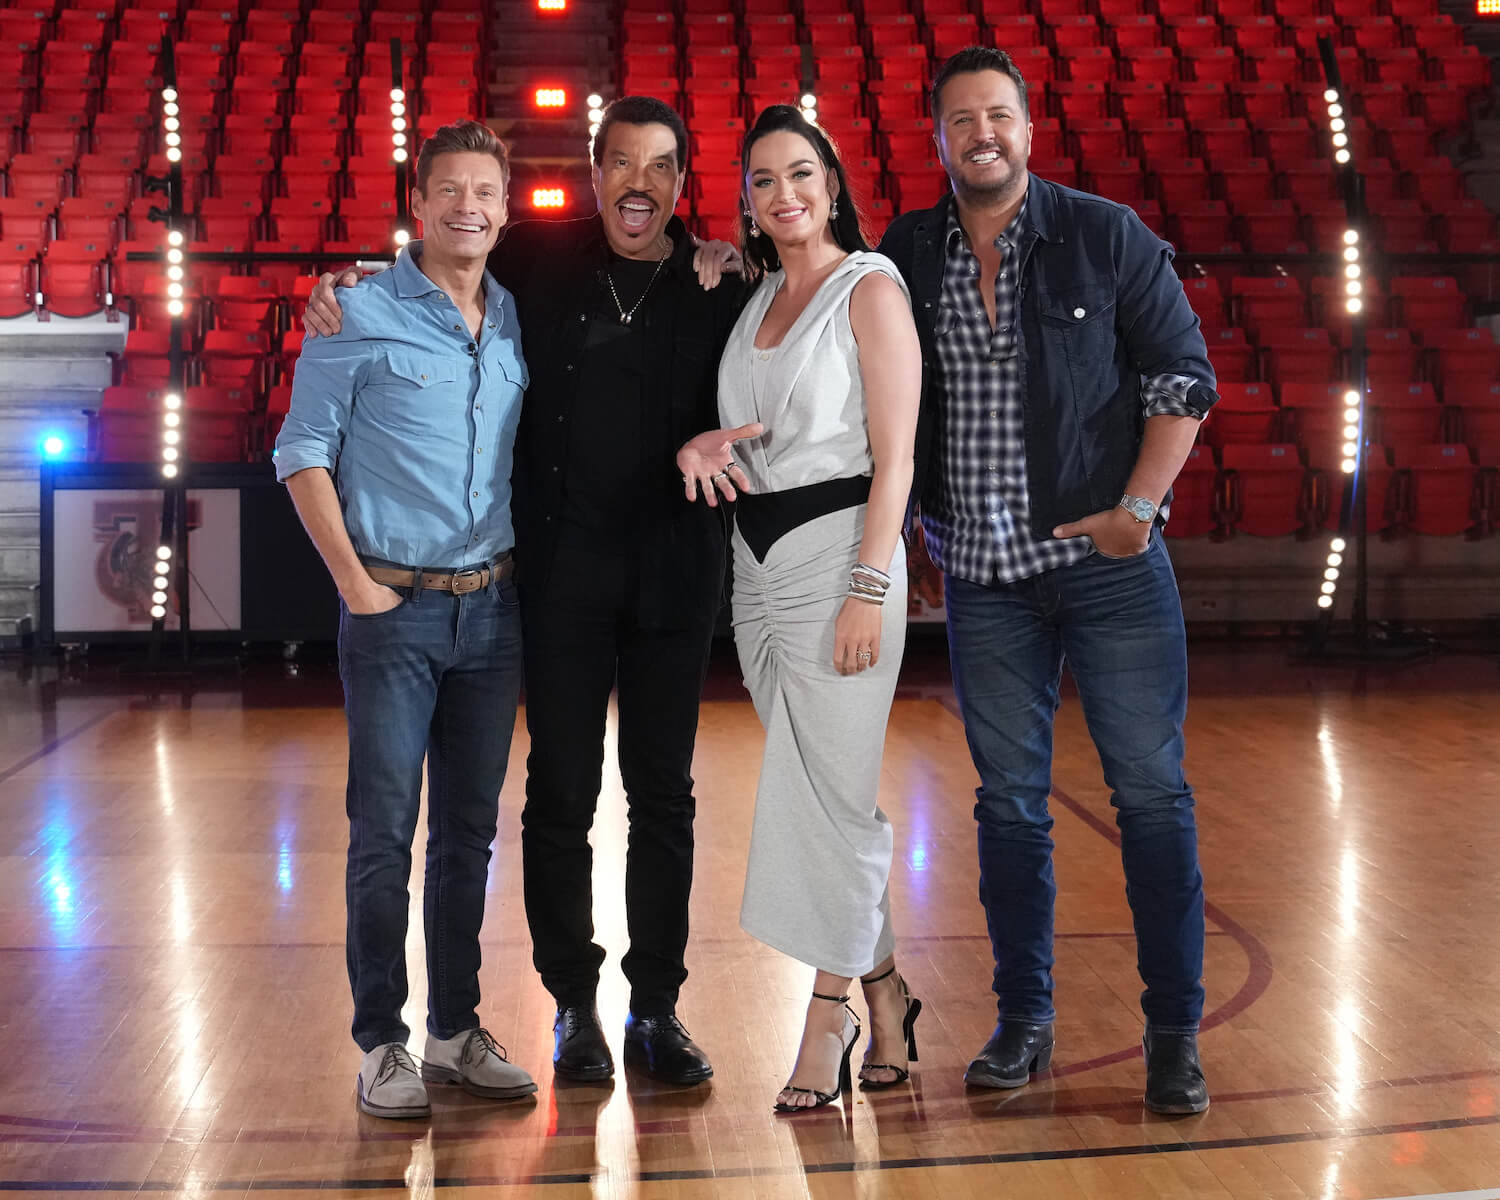 'American Idol' host Ryan Seacrest standing with judges Lionel Richie, Katy Perry, and Luke Bryan on a stage with red seats behind them